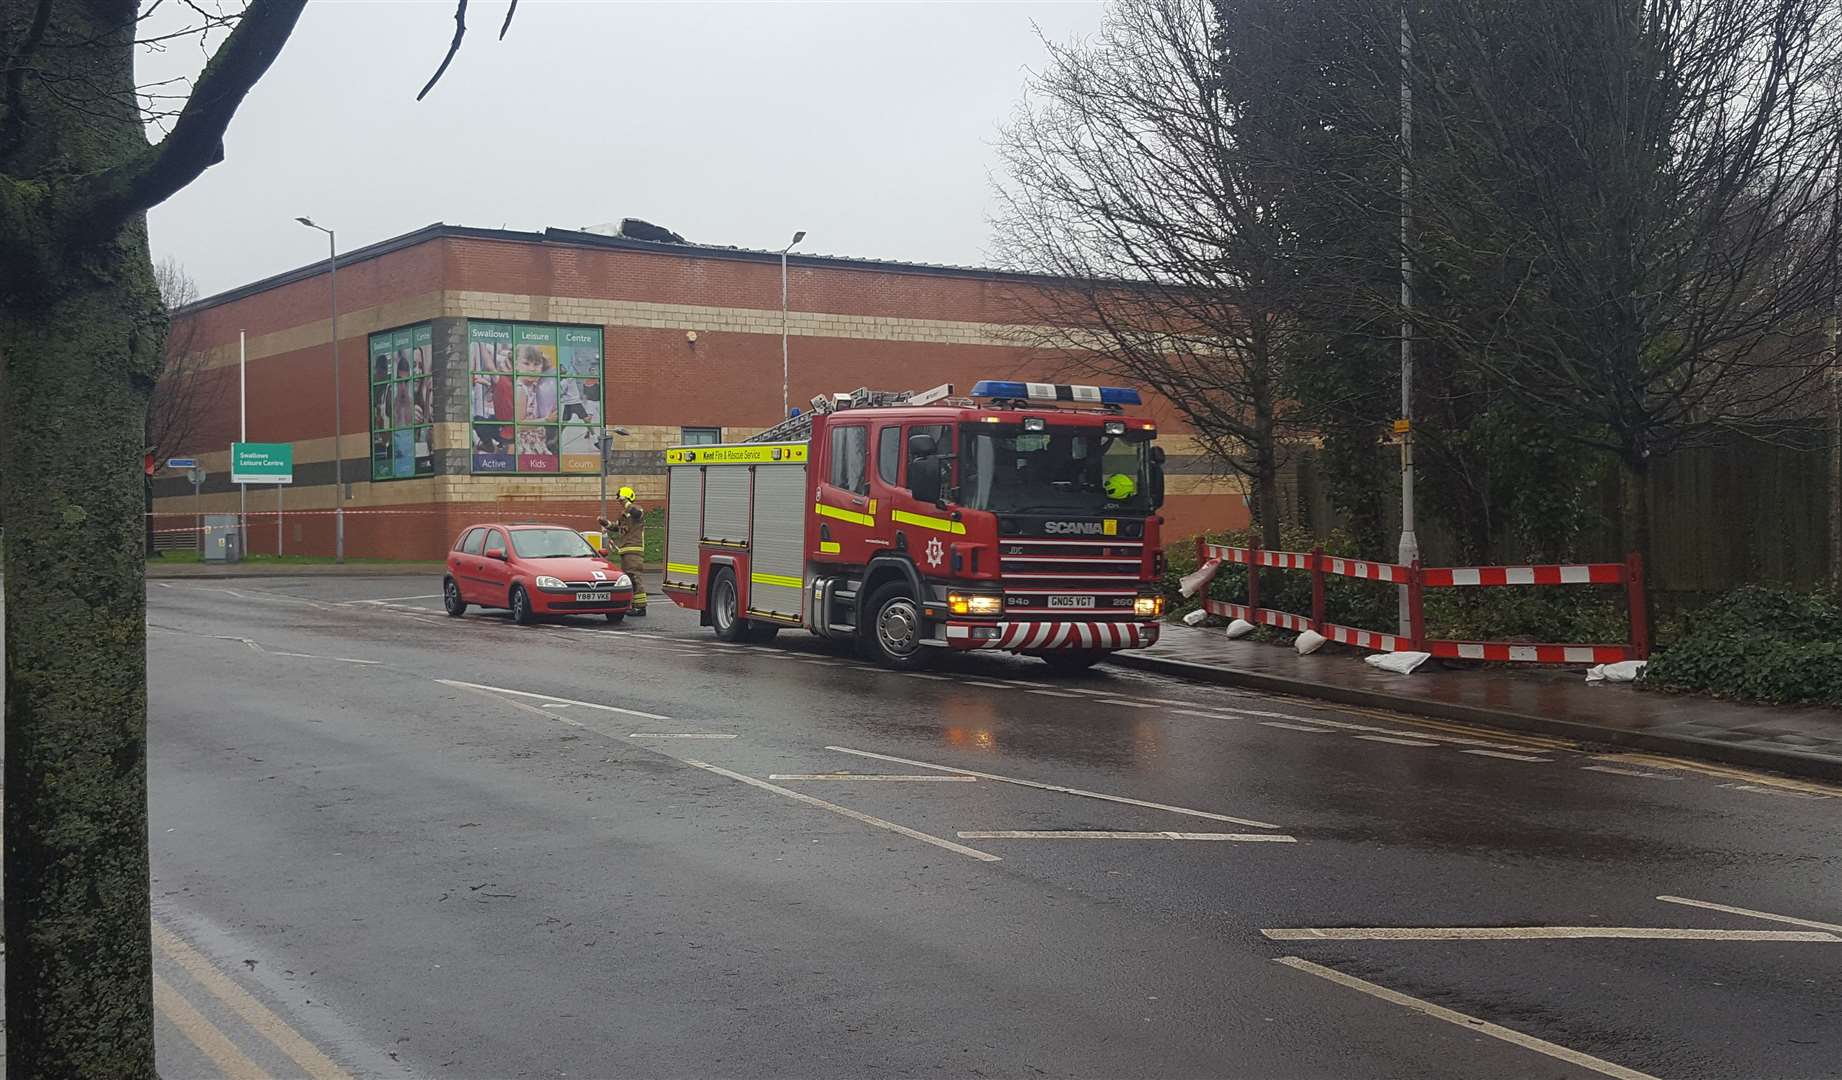 Firefighters cordoned off the area around The Swallows leisure centre after the storm damaged the roof